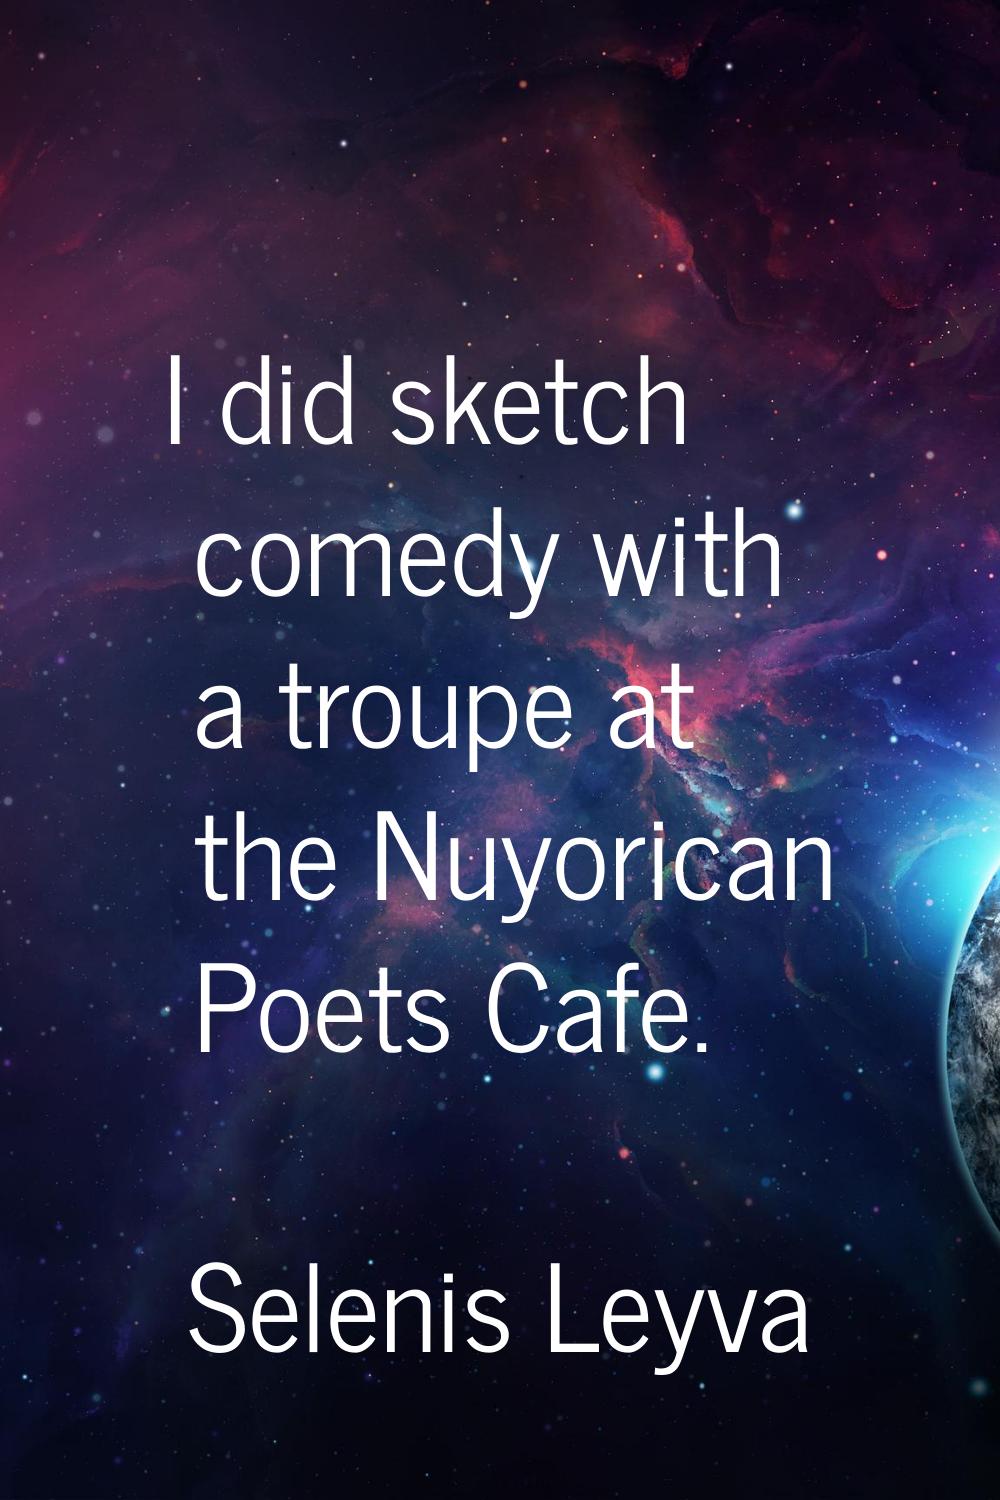 I did sketch comedy with a troupe at the Nuyorican Poets Cafe.